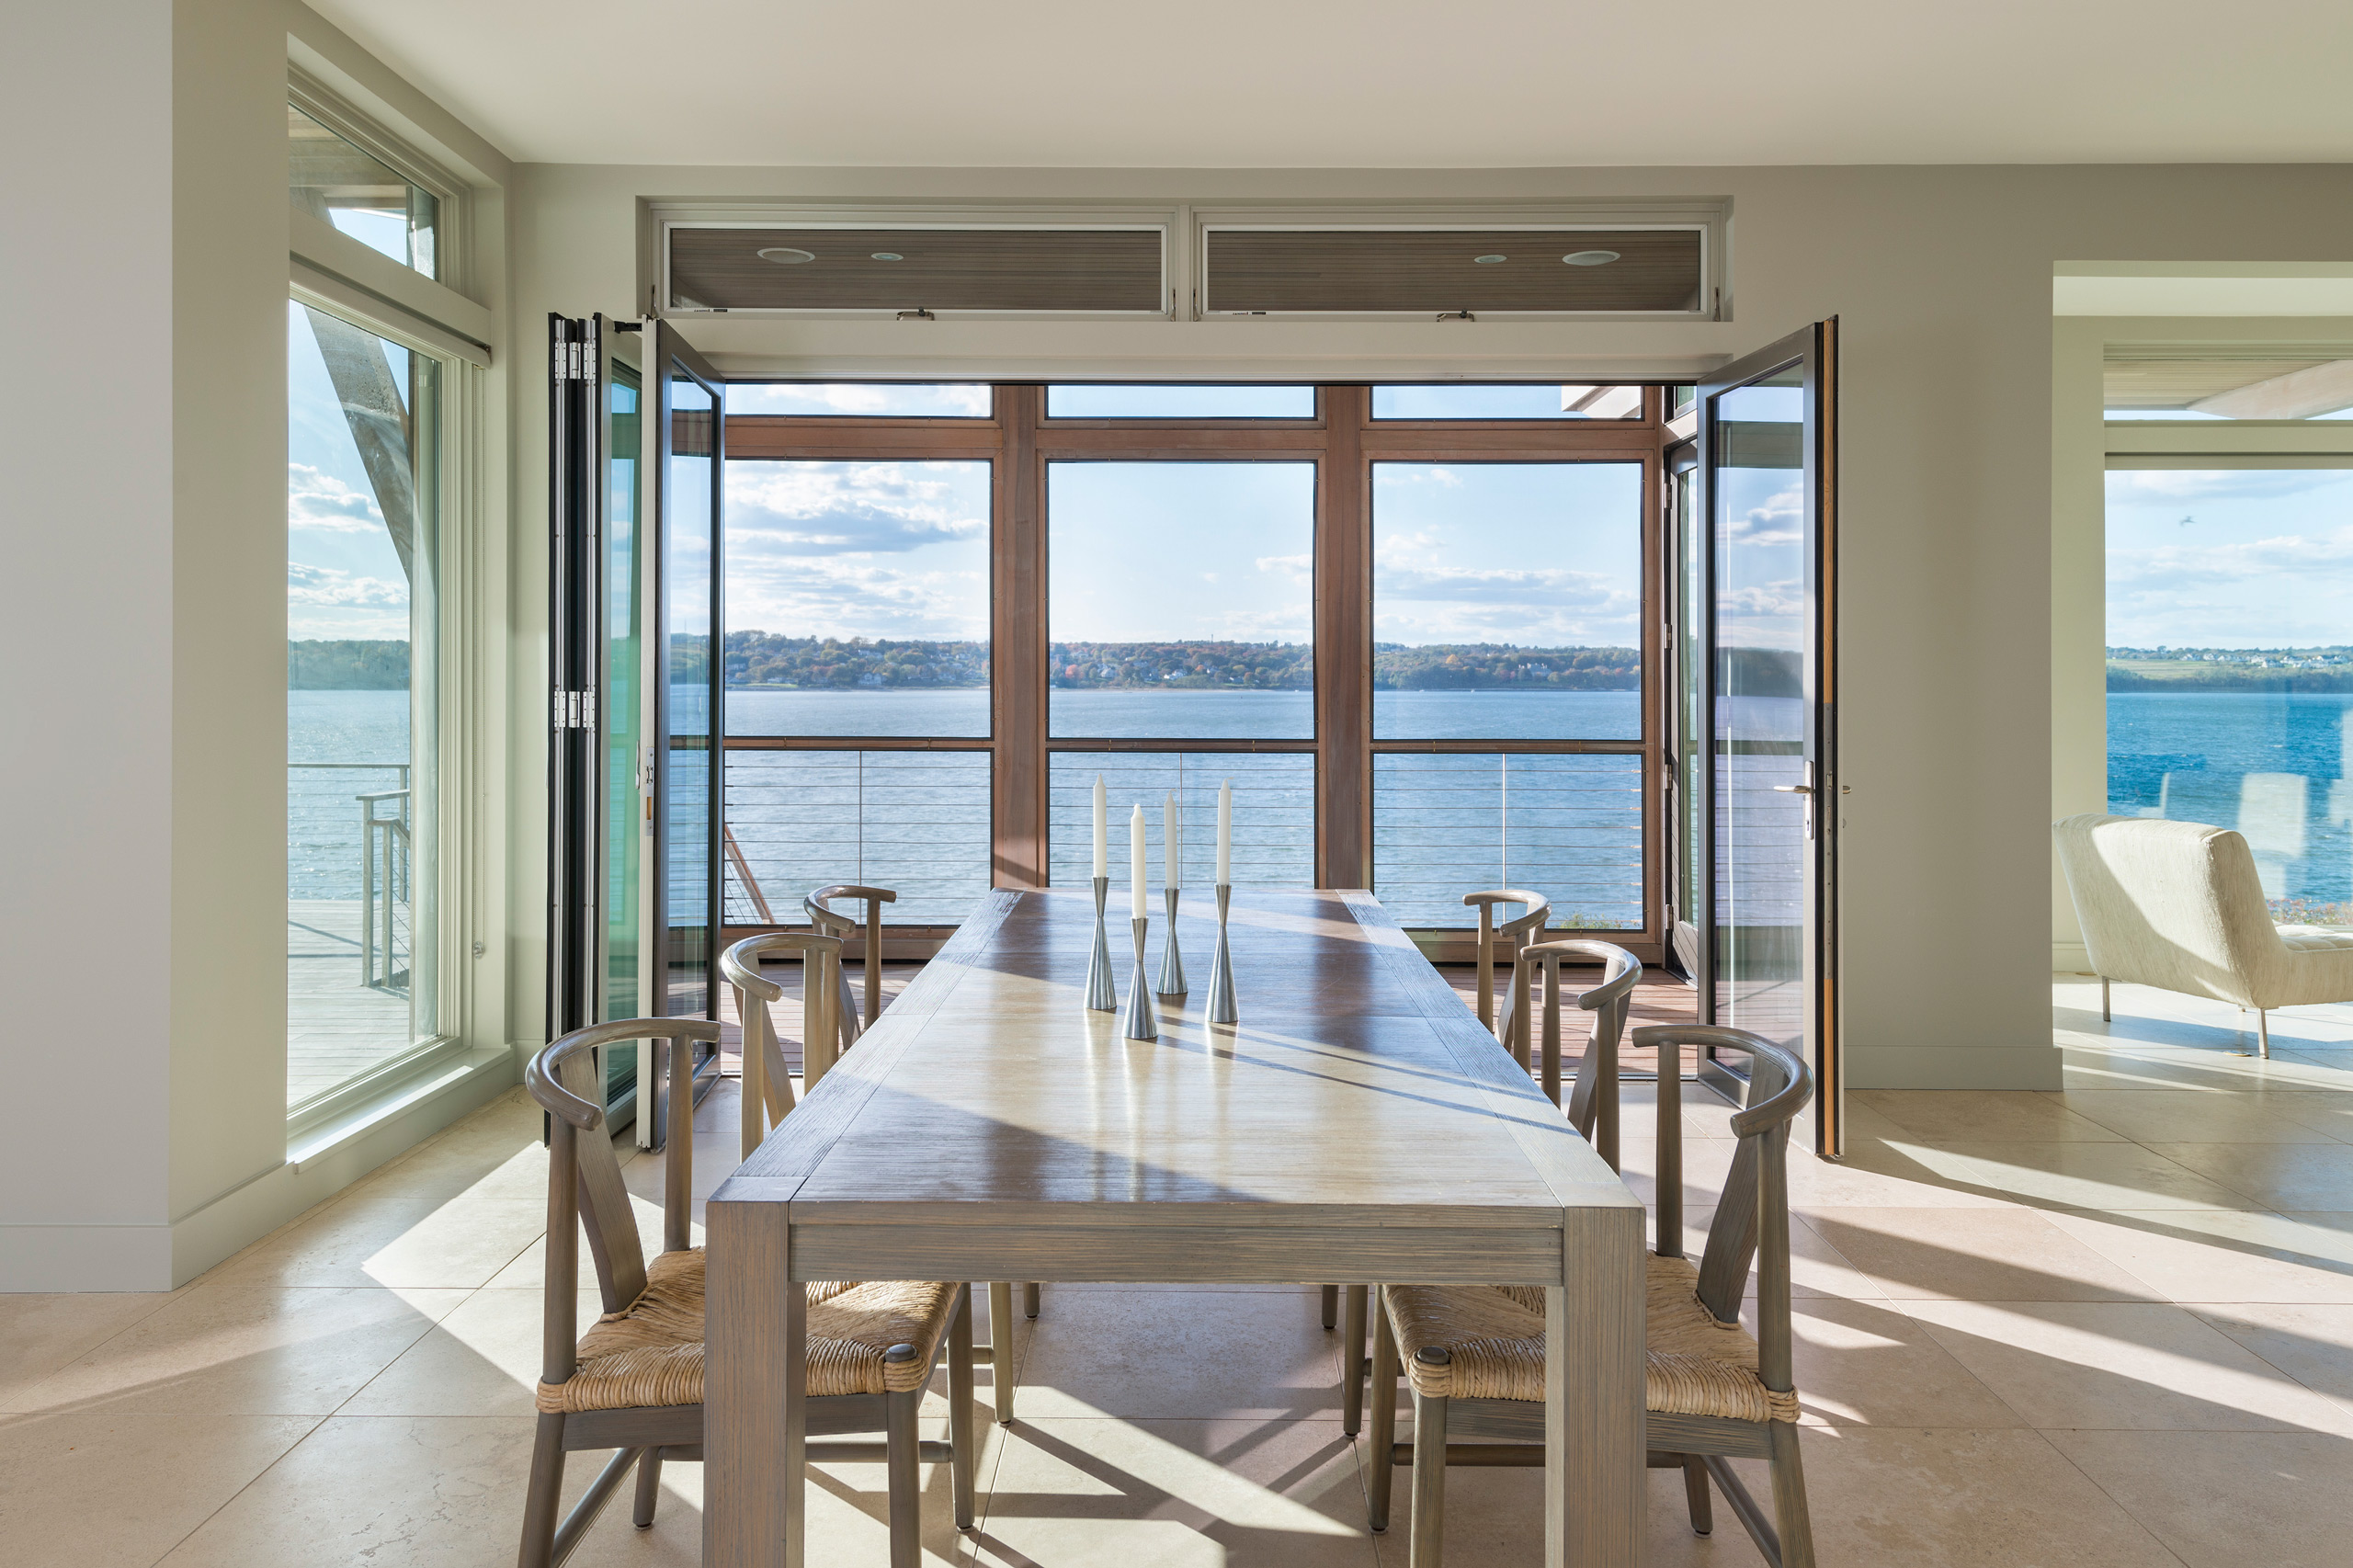 Dining area opens to screened porch with water views